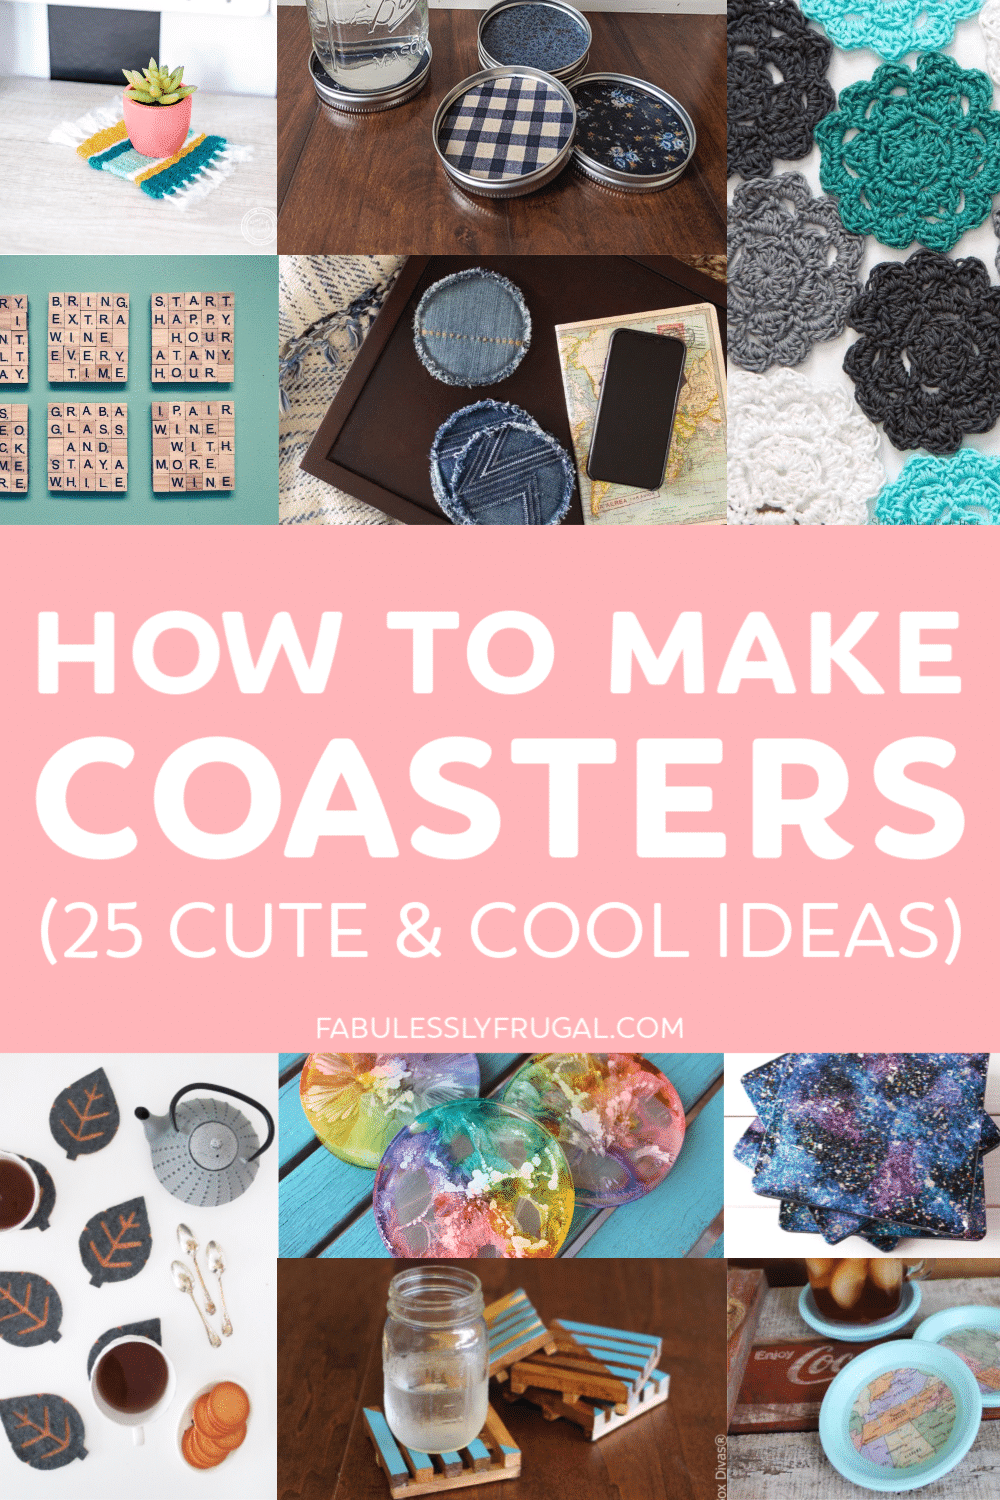 How to make coasters pinterest pin